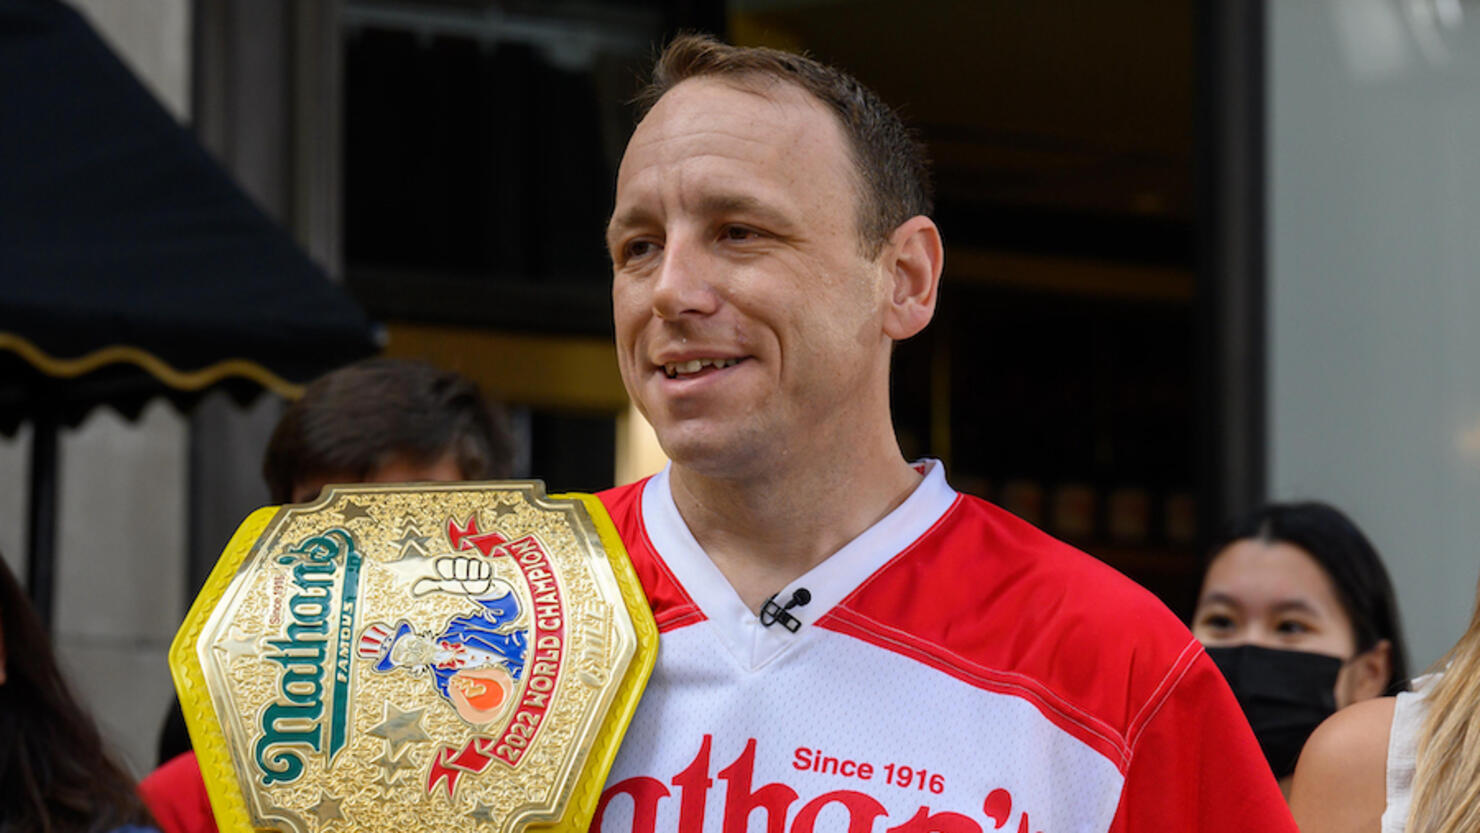 Joey Chestnut Sets Another Incredible Eating World Record | iHeart